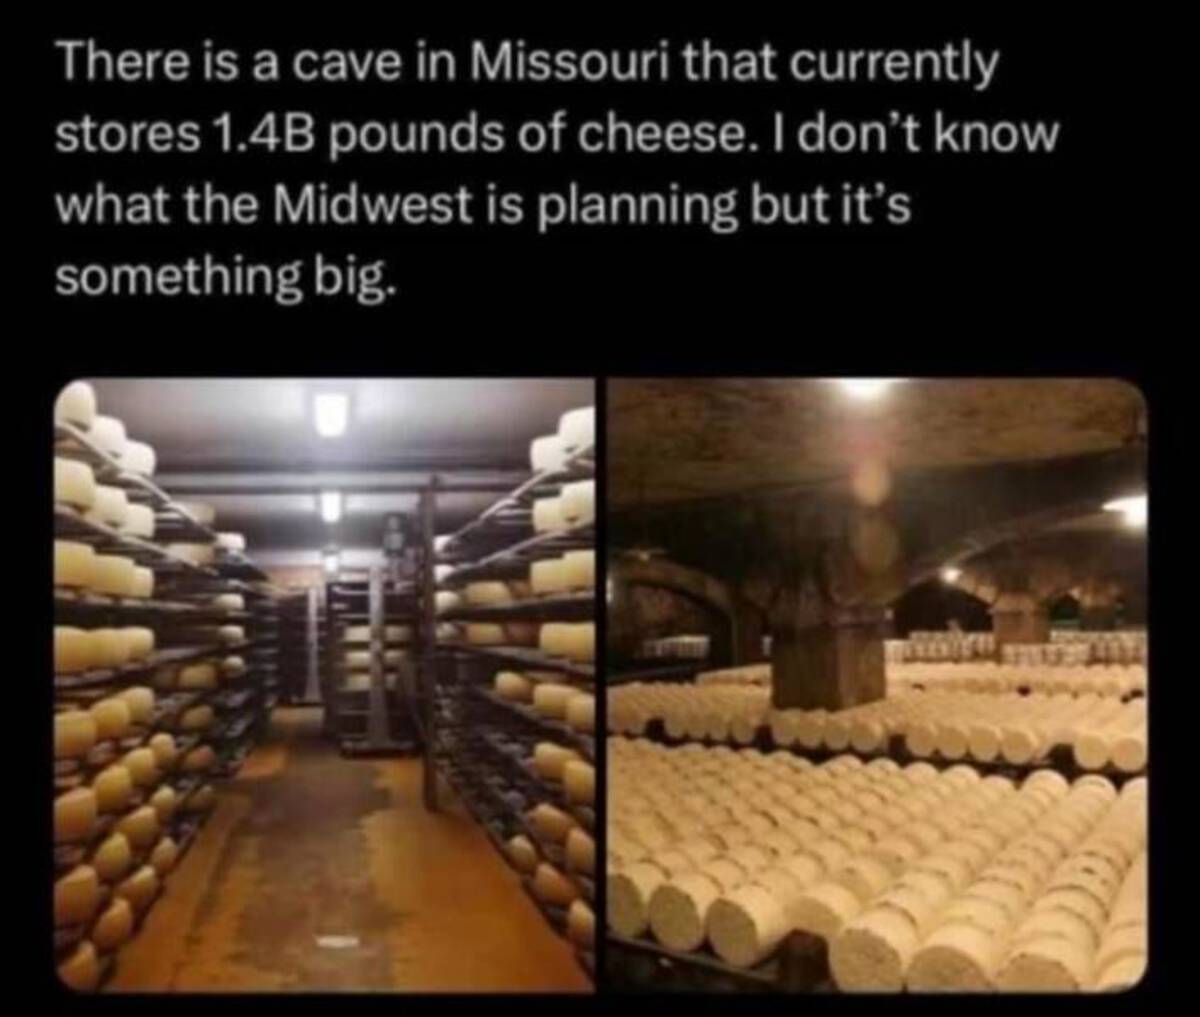 parmigiano-reggiano - There is a cave in Missouri that currently stores 1.4B pounds of cheese. I don't know what the Midwest is planning but it's something big.